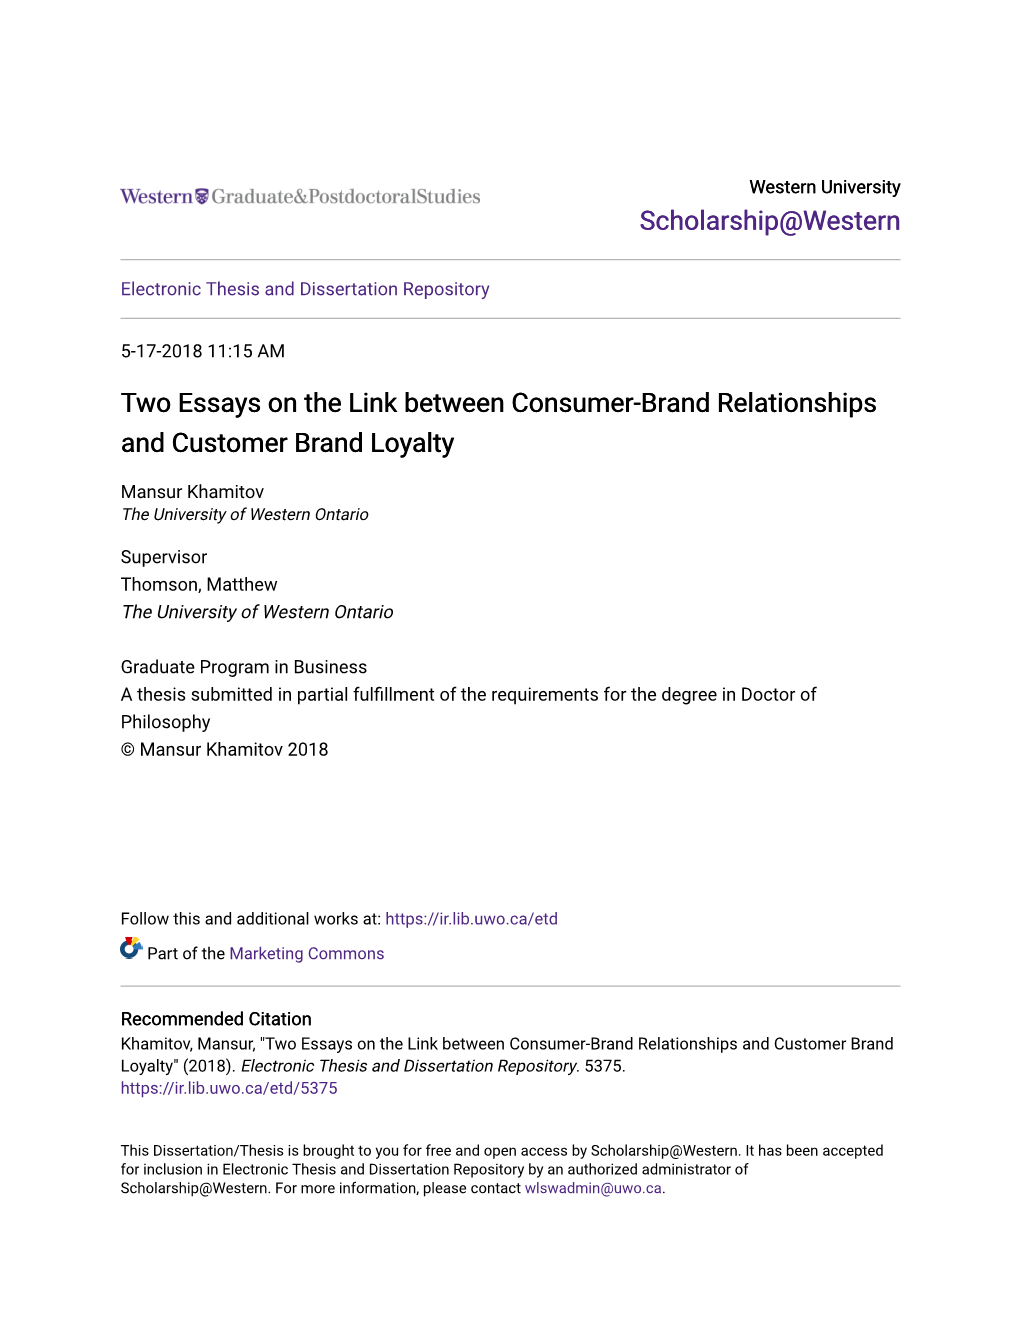 Two Essays on the Link Between Consumer-Brand Relationships and Customer Brand Loyalty